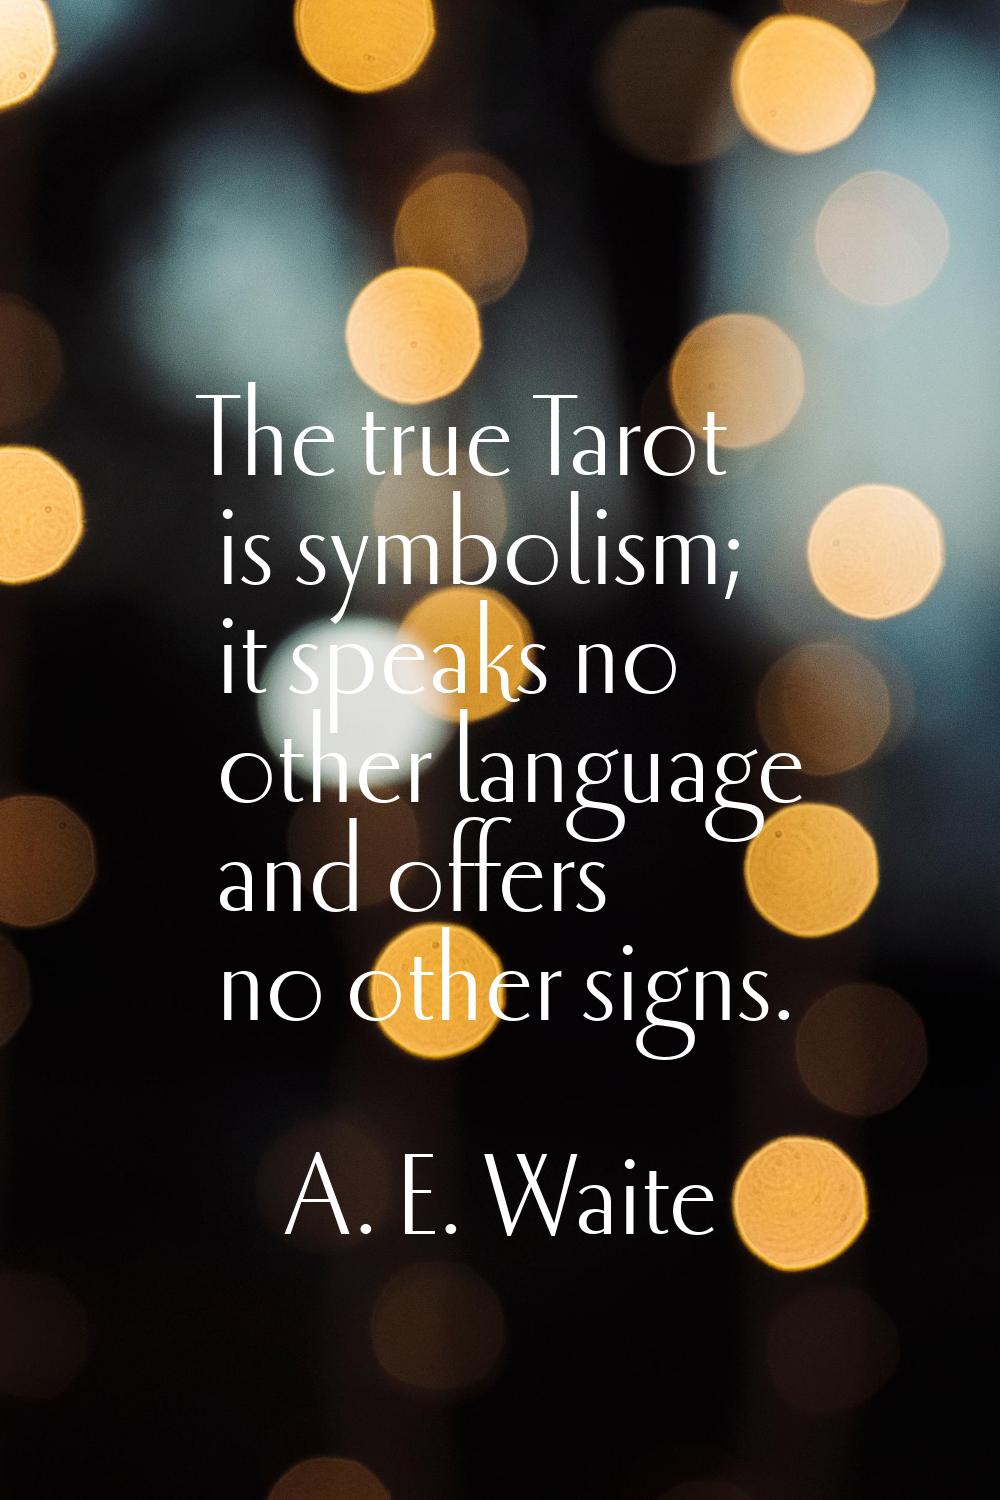 The true Tarot is symbolism; it speaks no other language and offers no other signs.